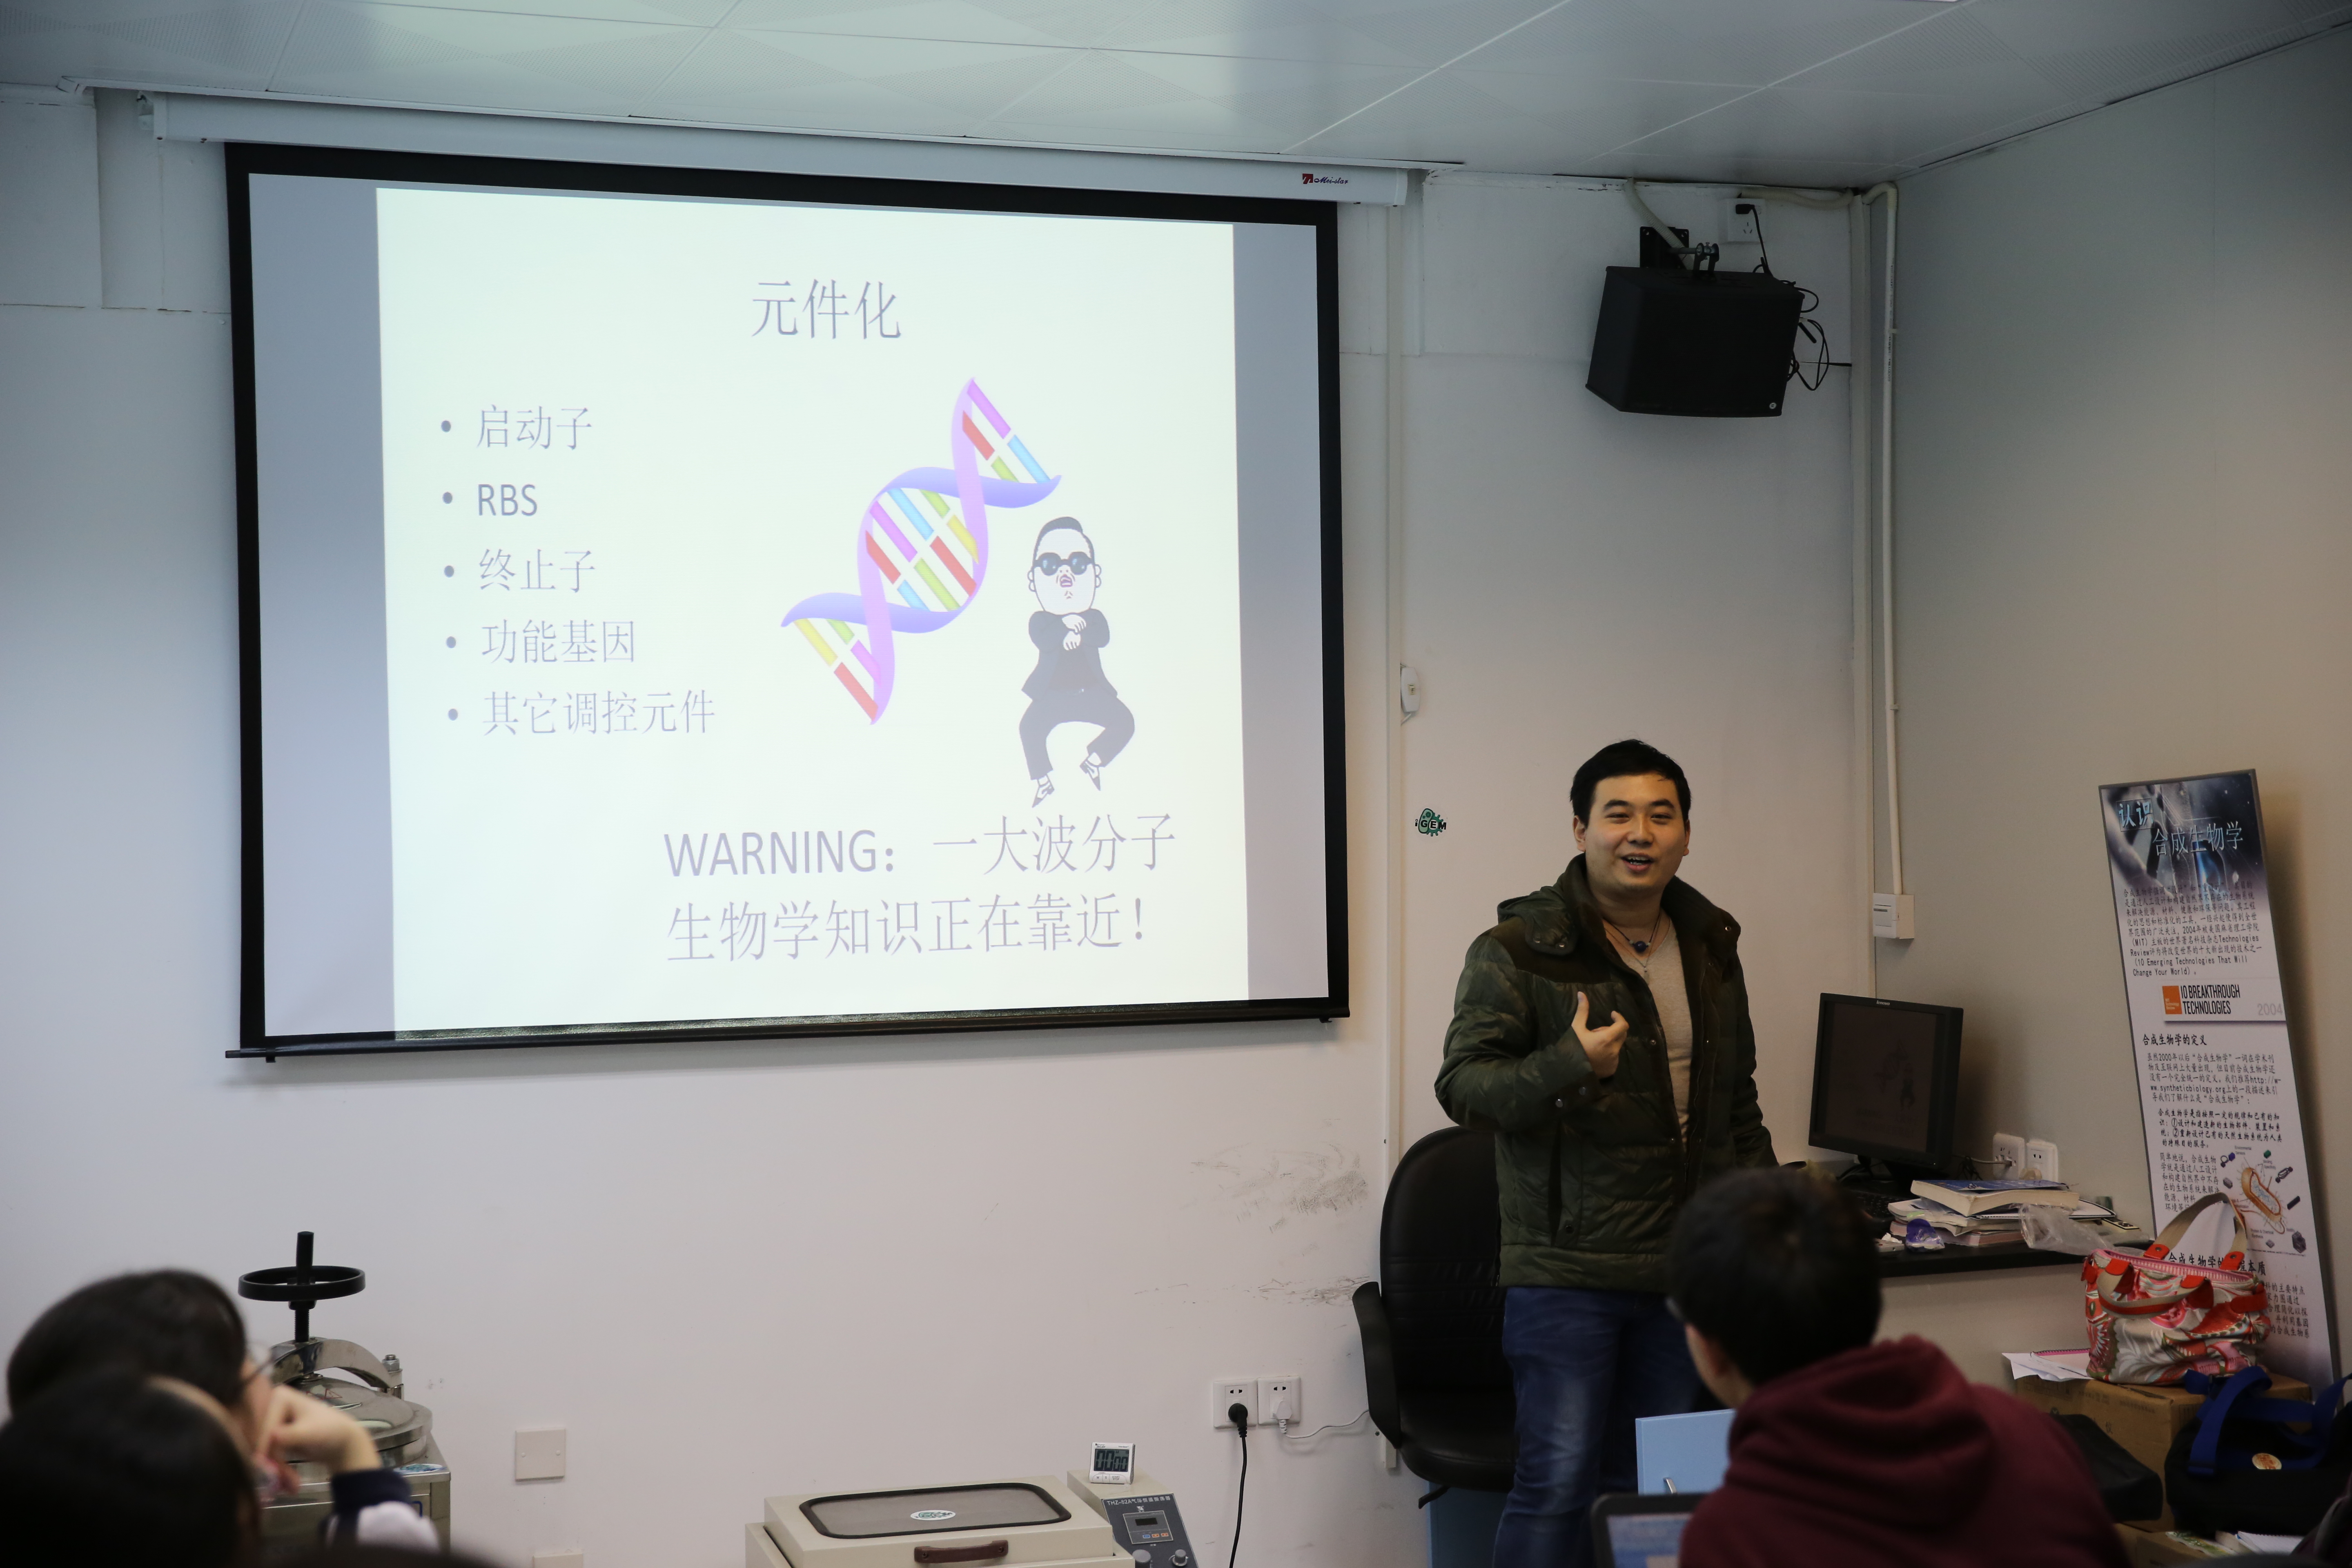 Mr.Wang from Beijing Genomics Institute is teaching us. March 12, 2014